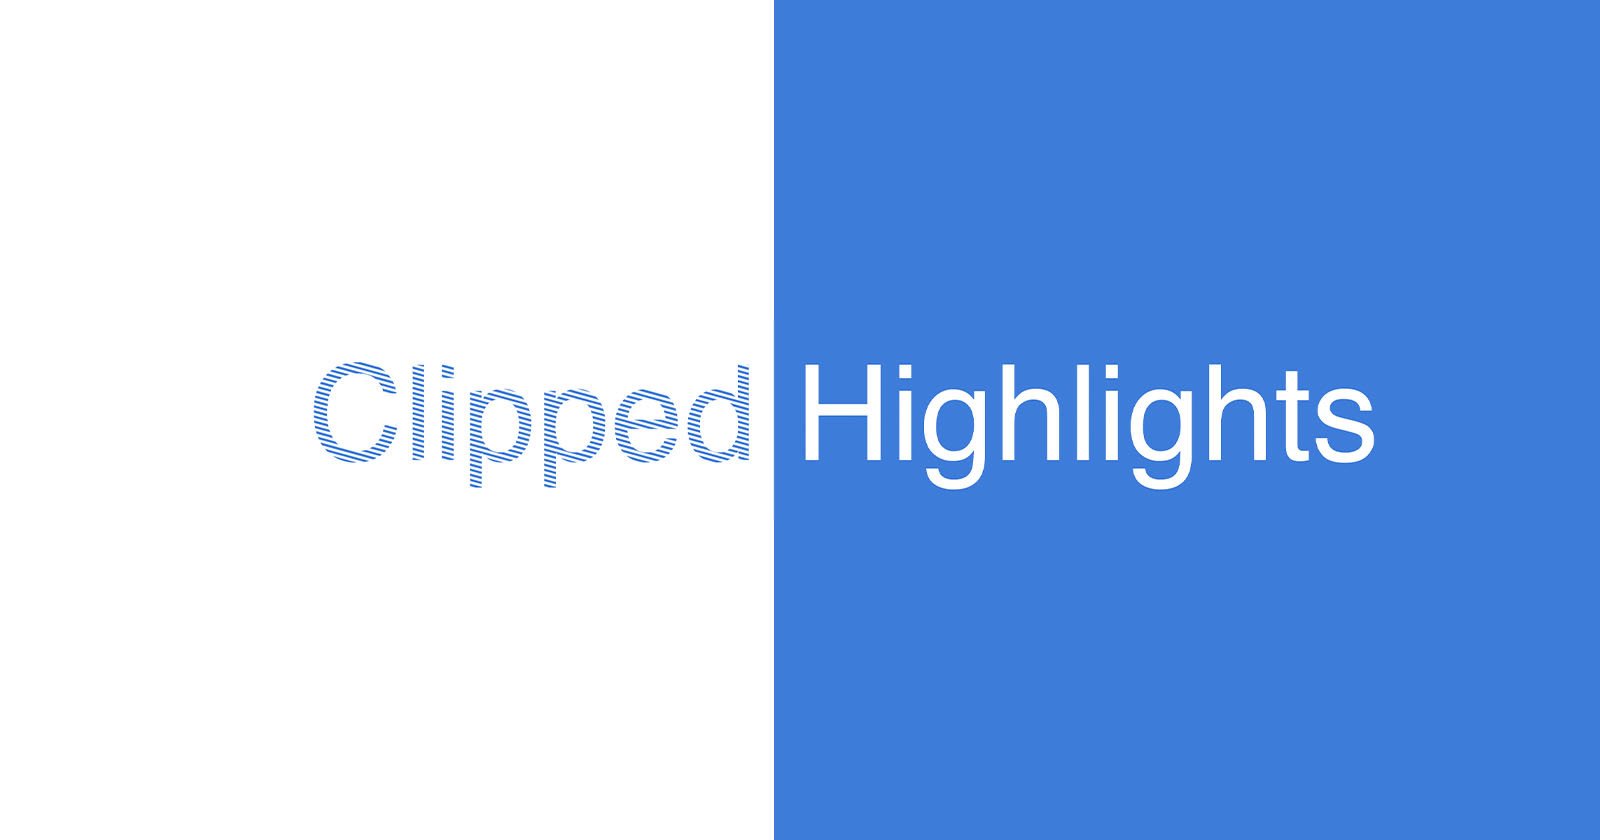 Introducing Clipped Highlights, a New PetaPixel Weekly Newsletter